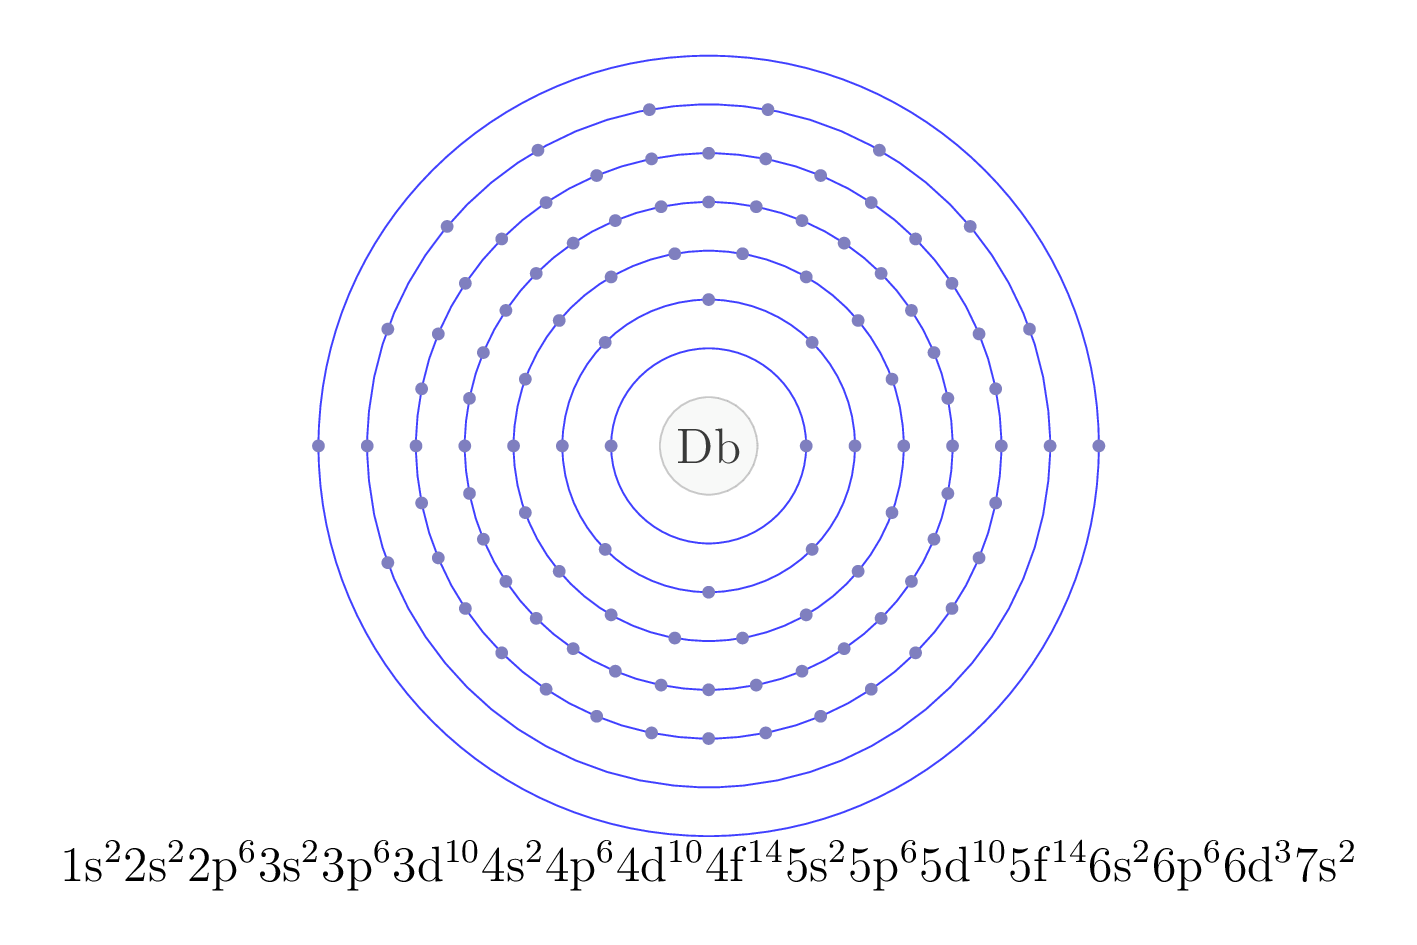 electron configuration of element Db